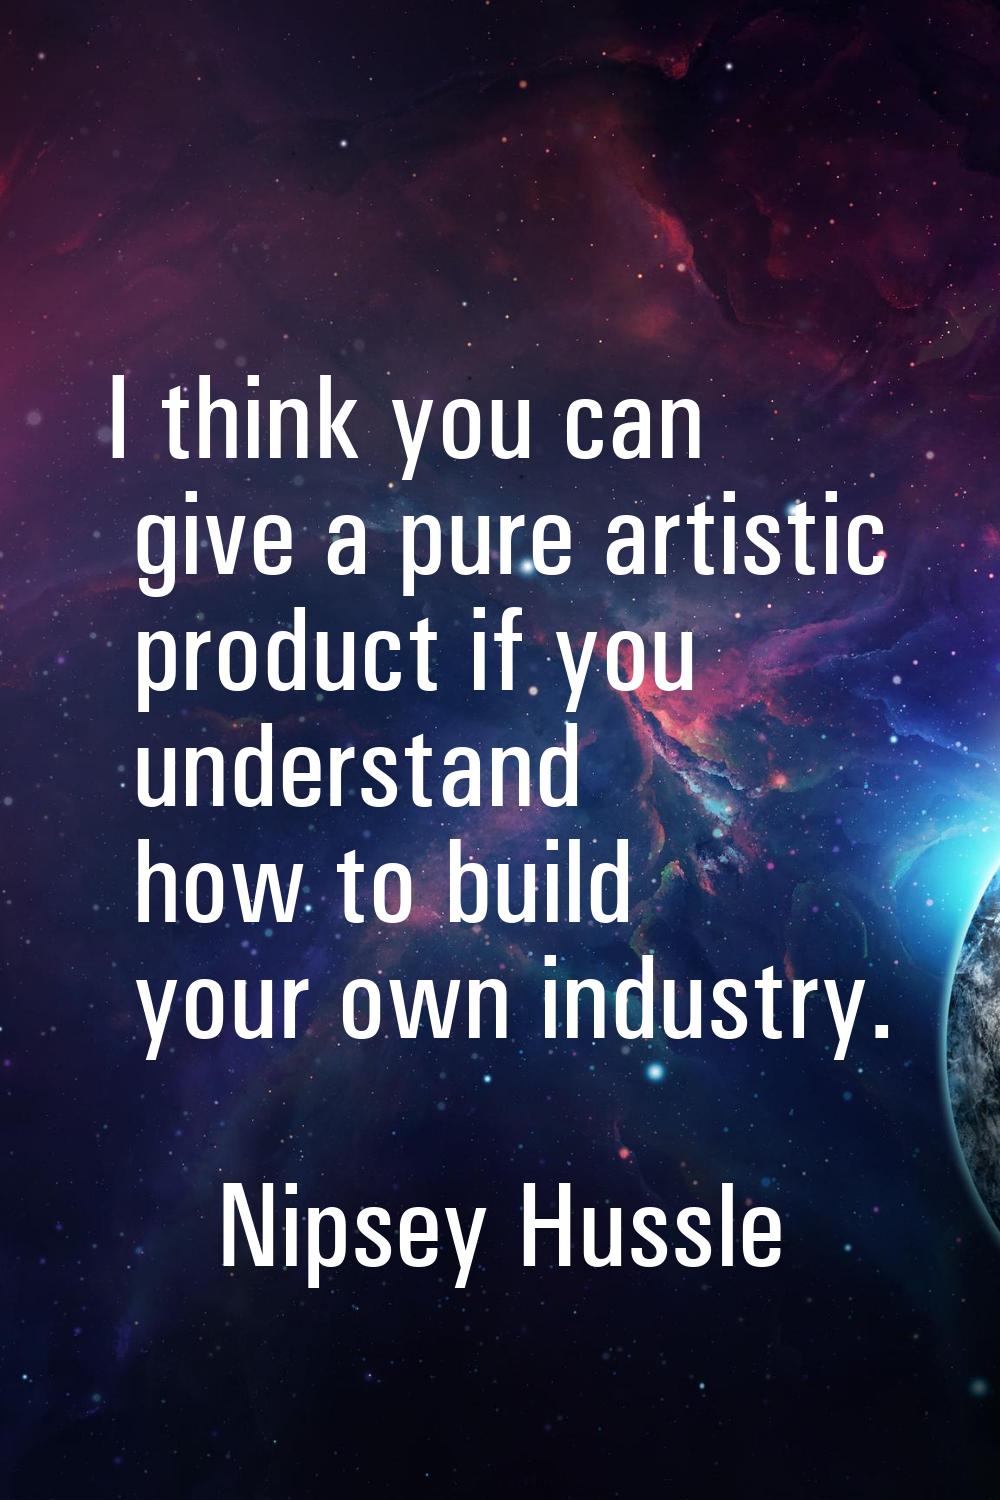 I think you can give a pure artistic product if you understand how to build your own industry.